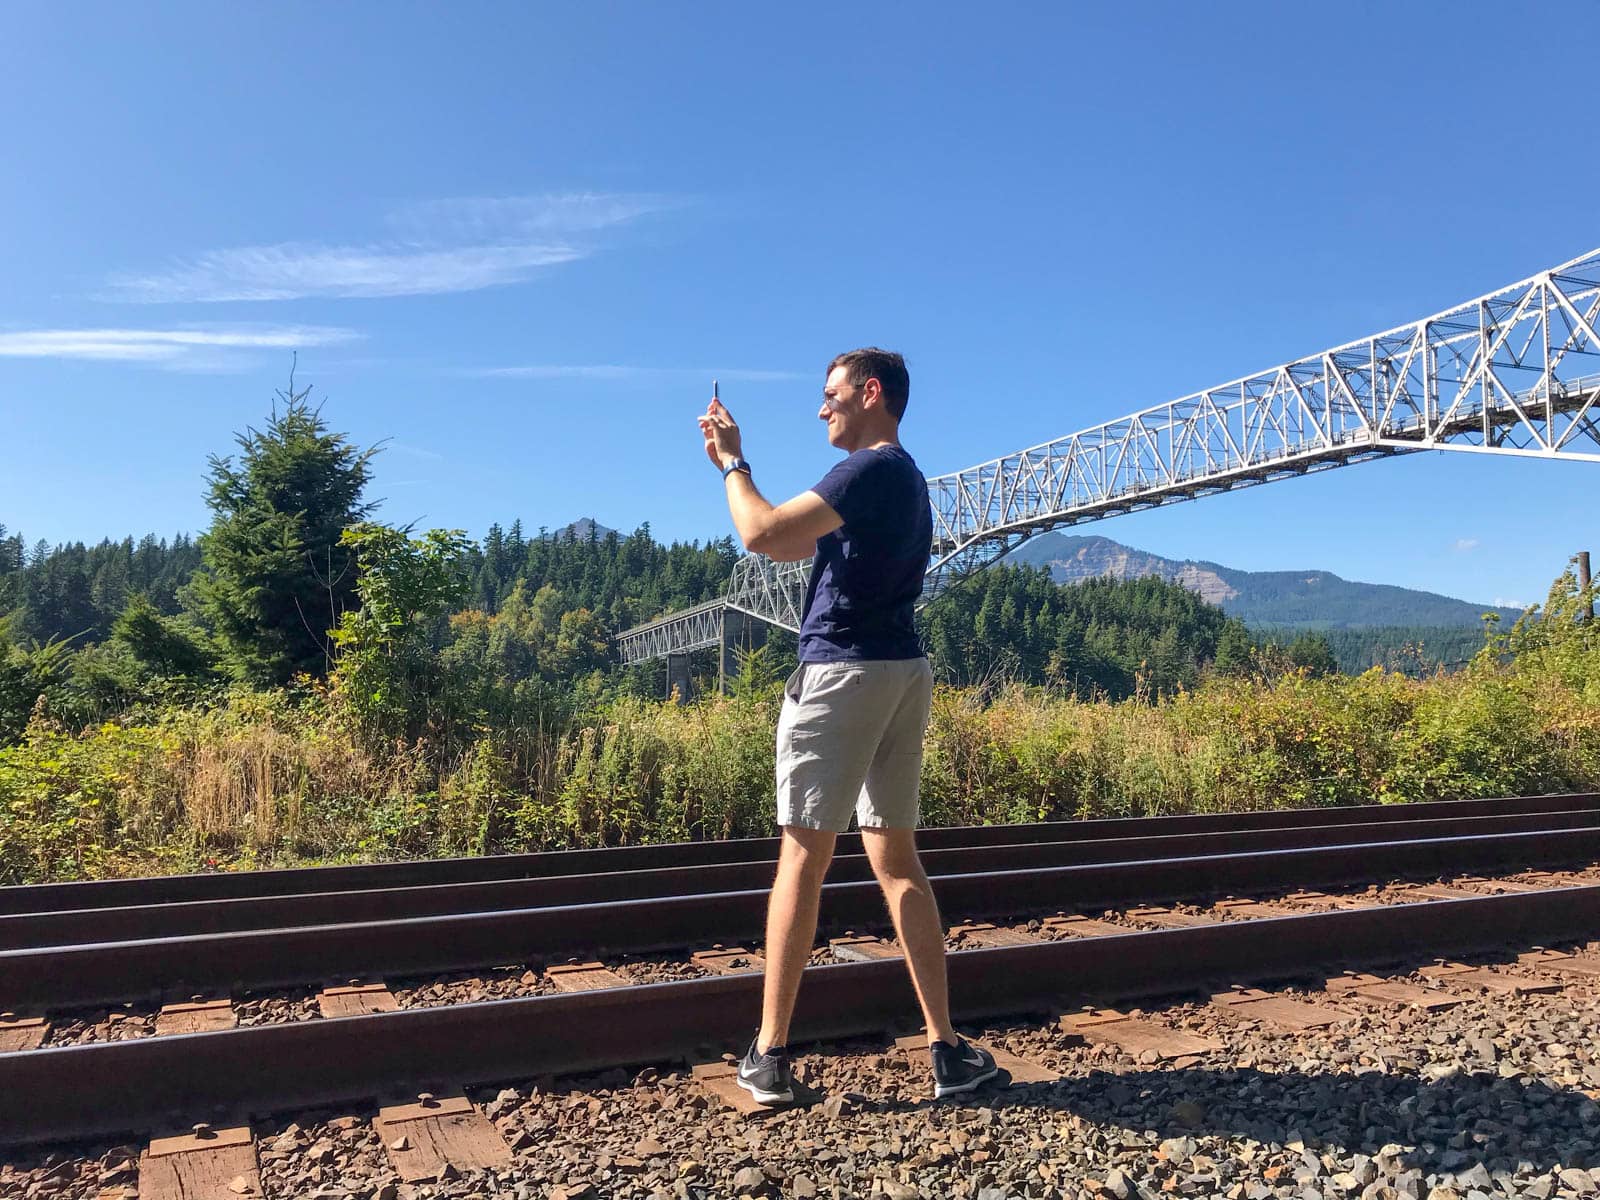 A man wearing sunglasses, taking a photo on a smartphone. There is a gorge and bridge going across it on his left. He is standing in front of some train tracks.